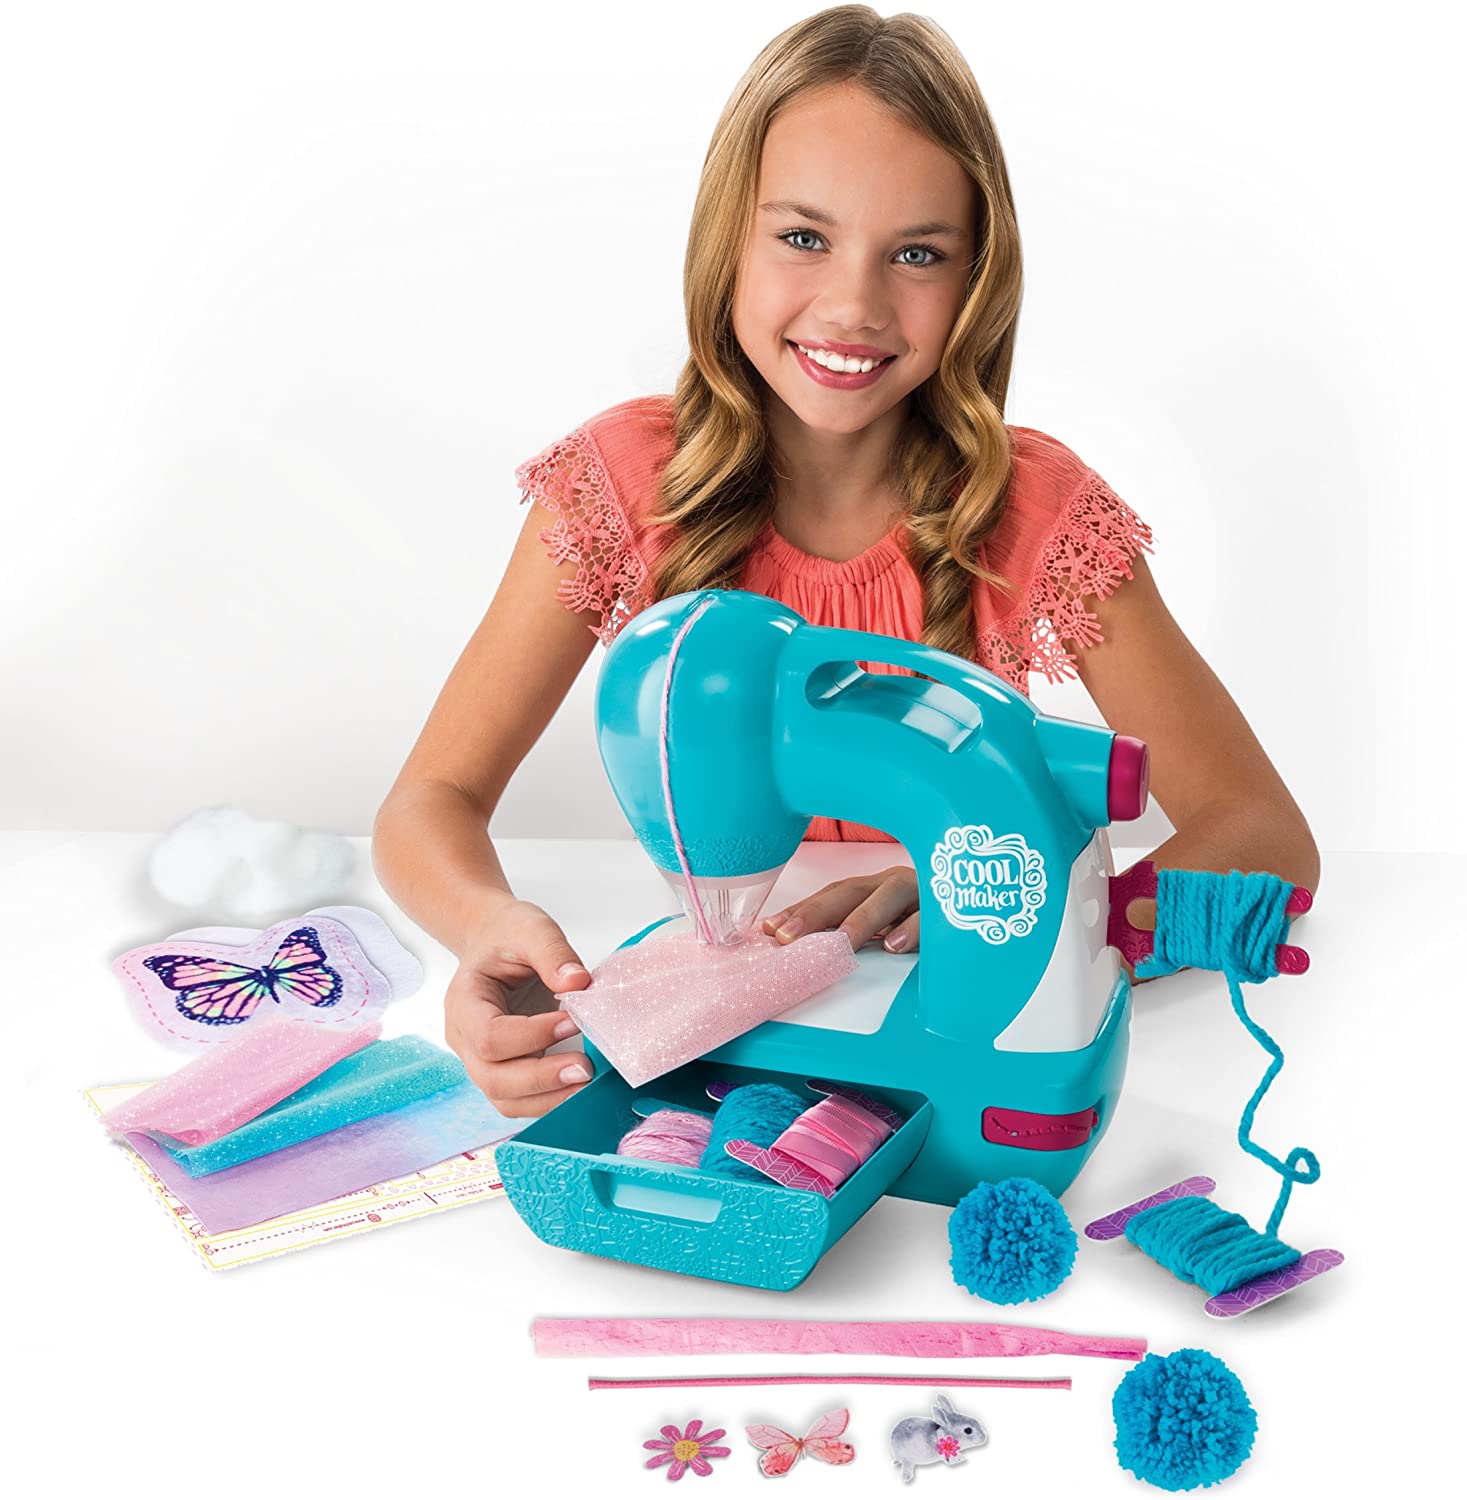 best sewing machines for kids